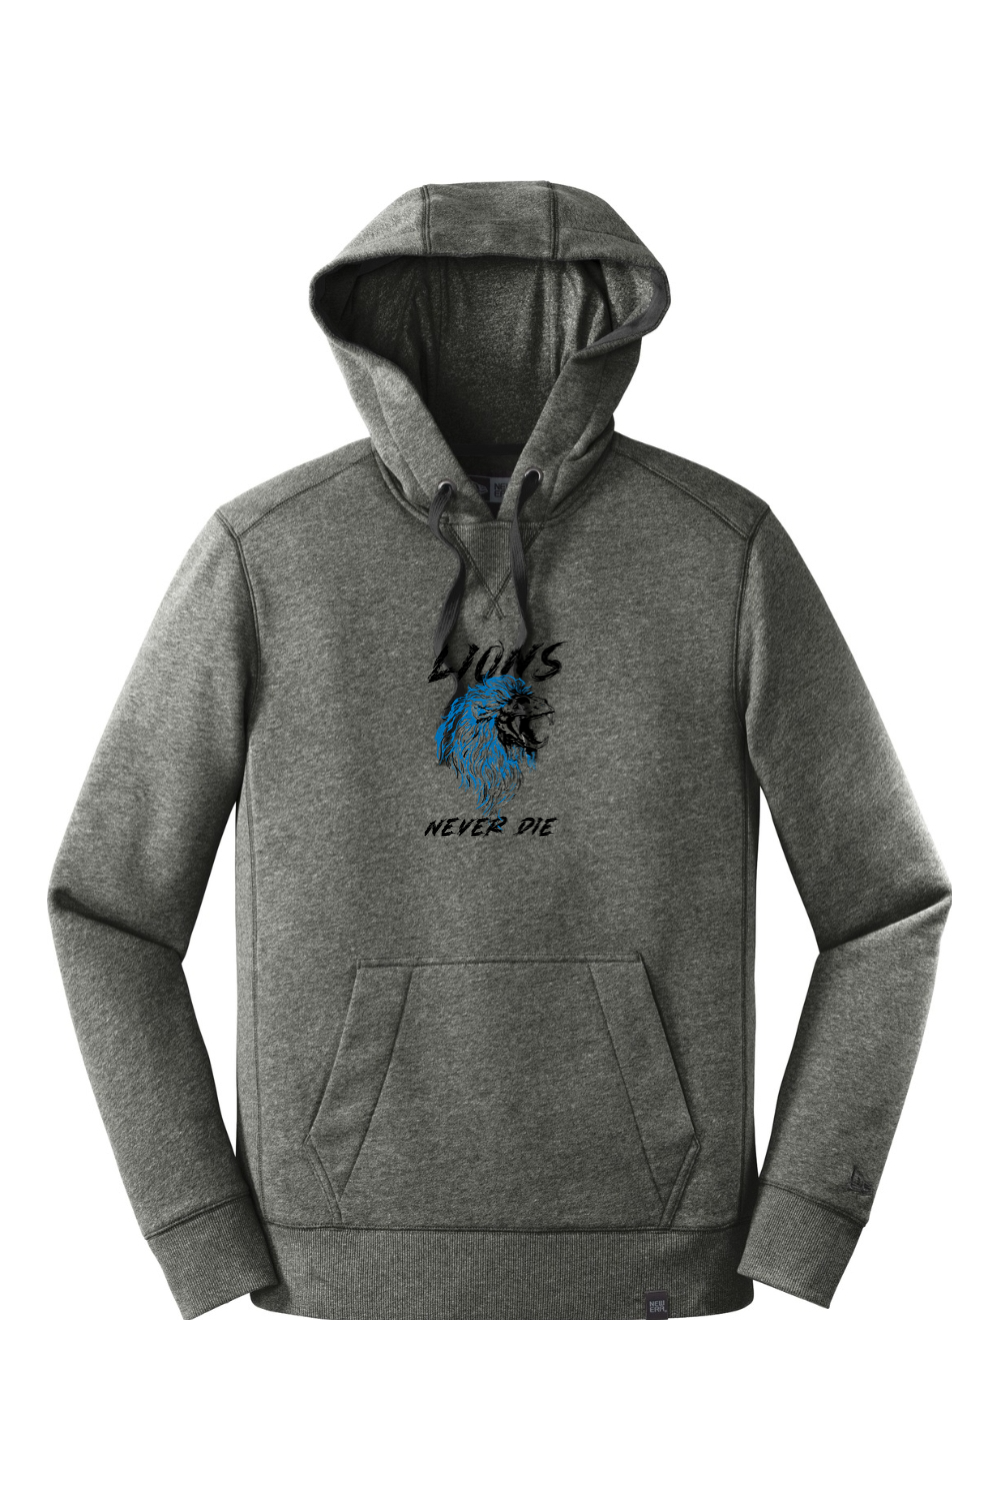 Lions Never Die - New Era French Terry Hoodie